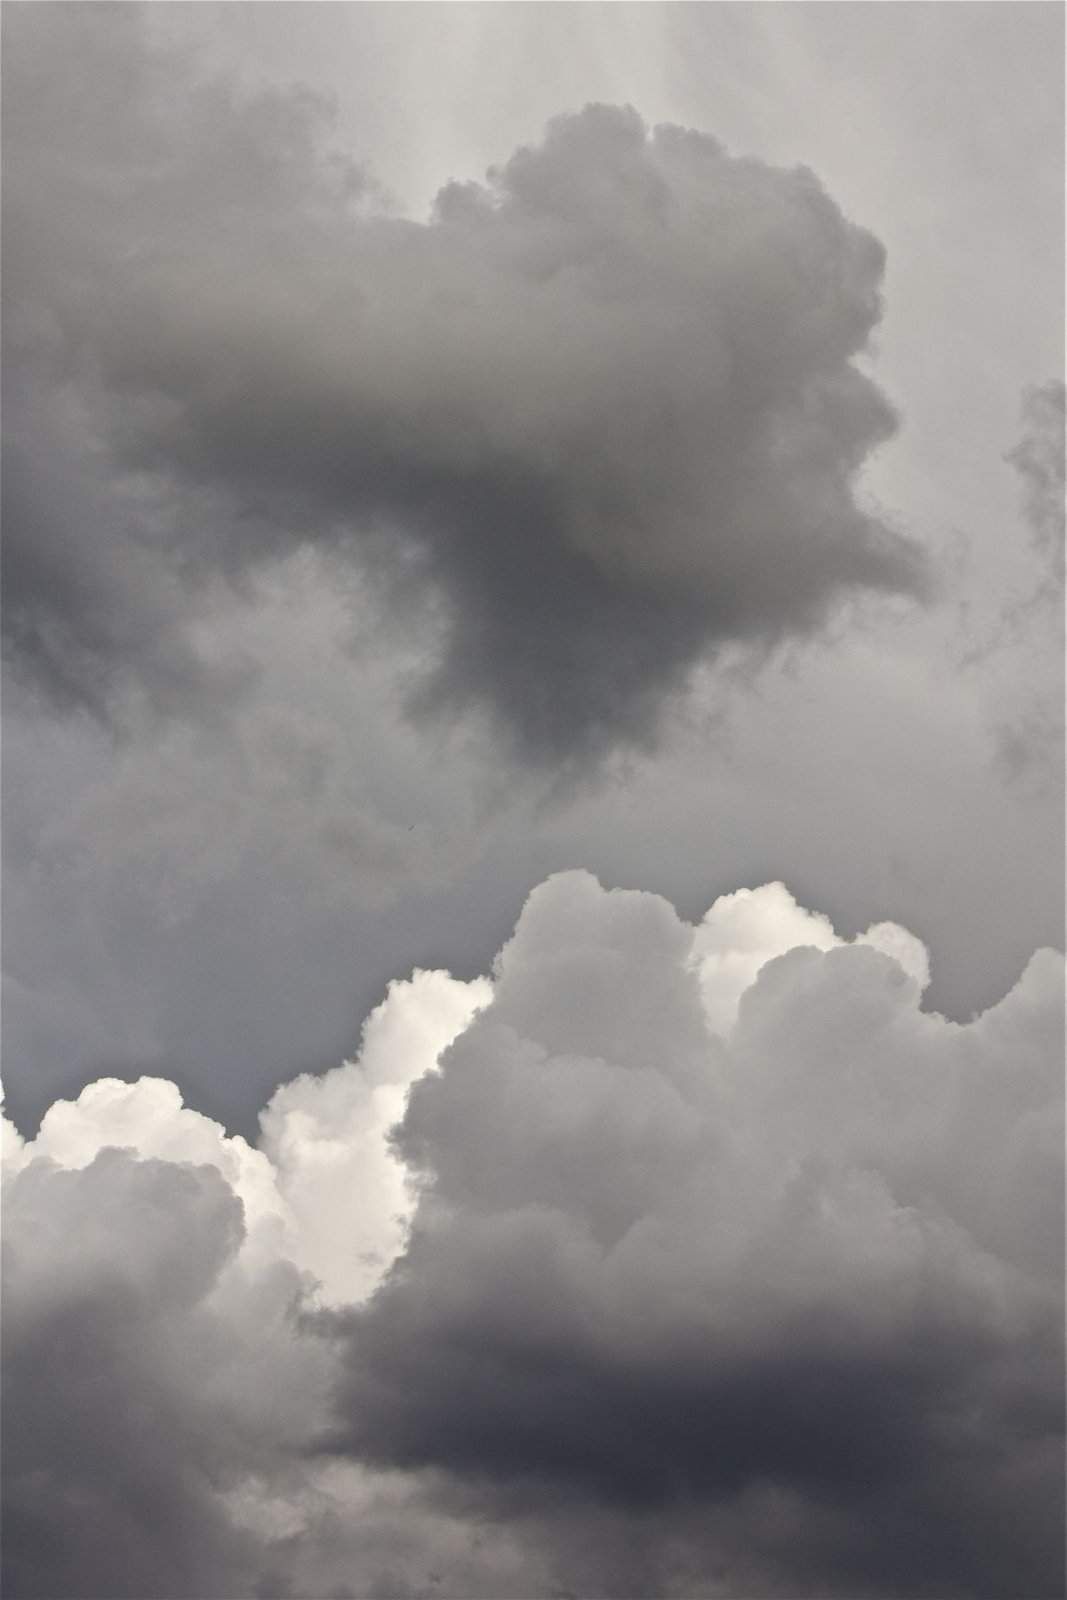 A dark and brooding sky with large clouds - Gray